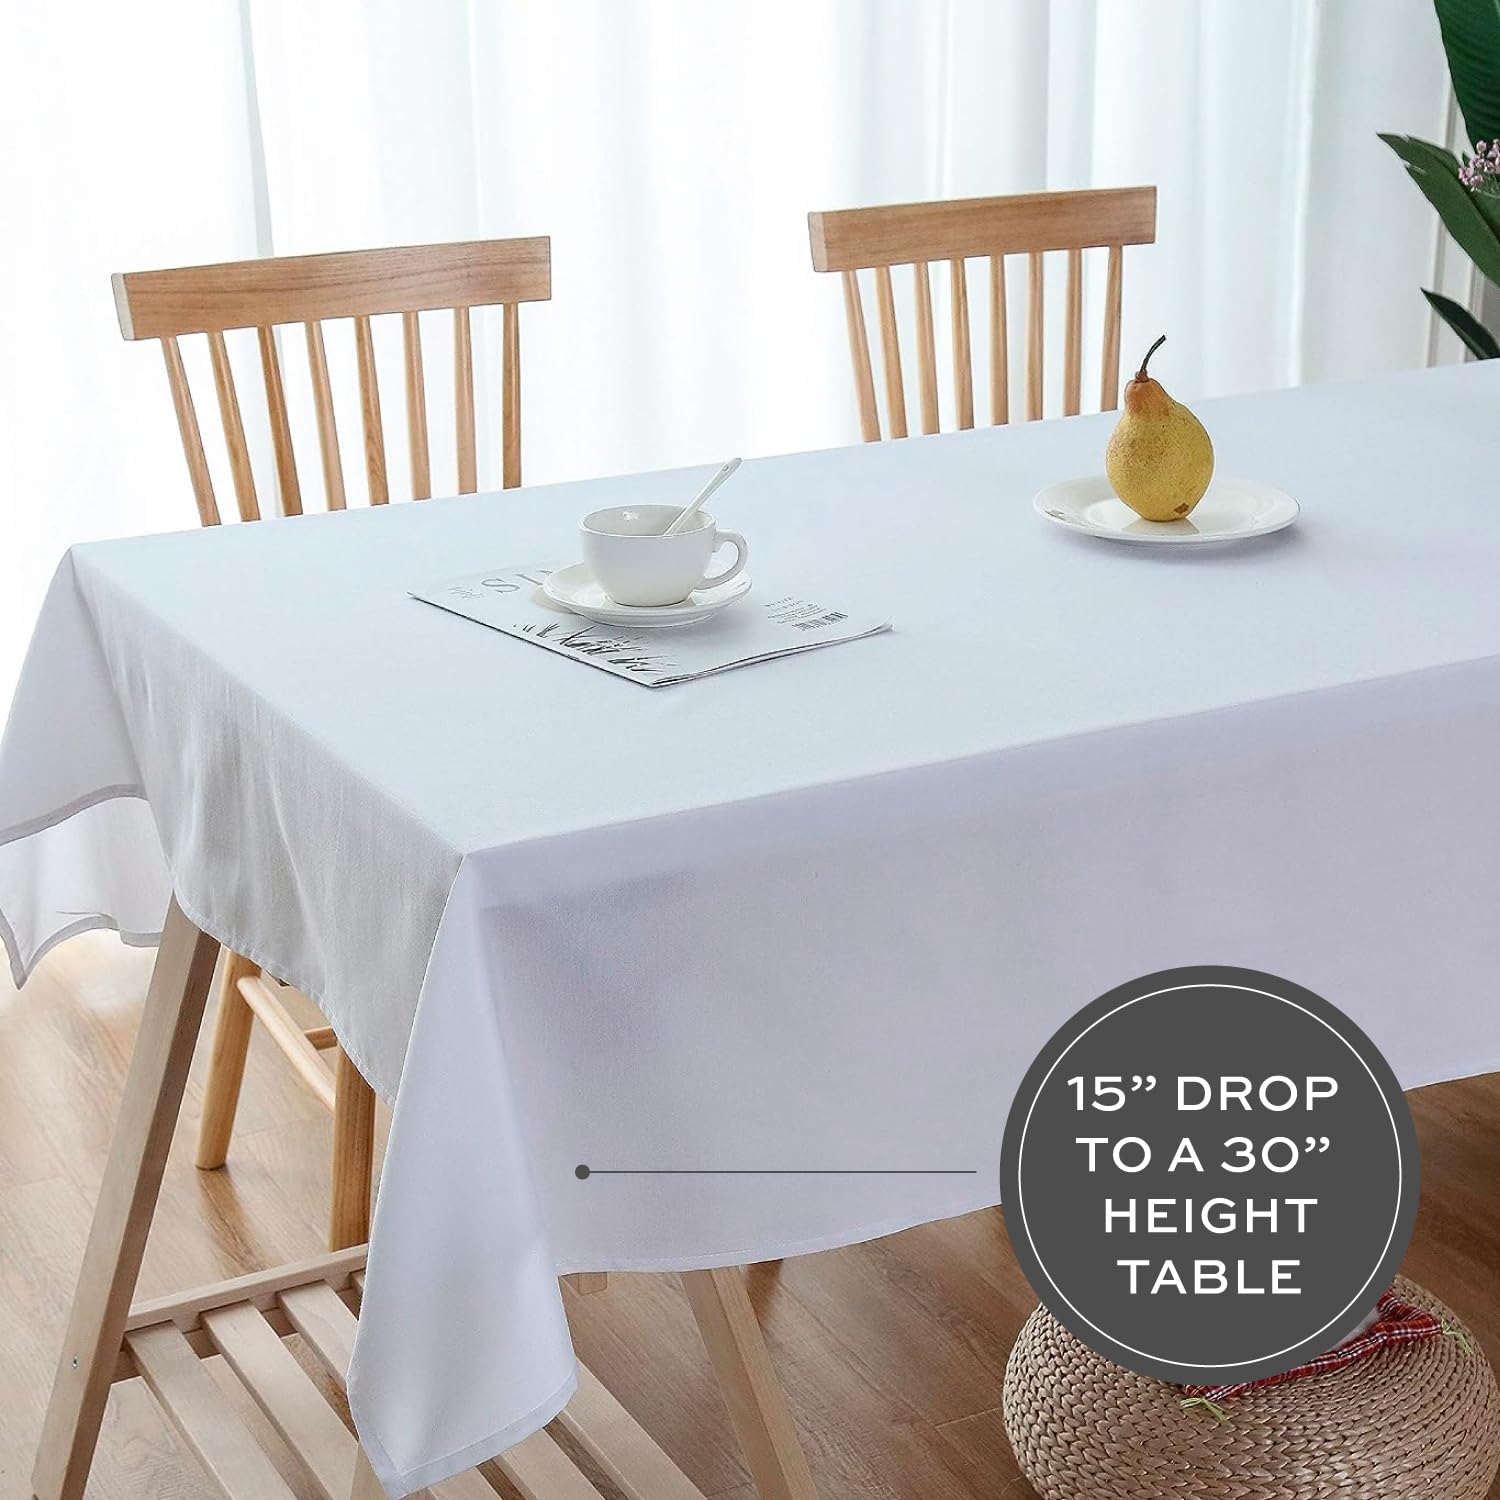 WEALUXE White Table Cloths for 6 Foot Folding Tables [2 Pack, 60x102 Inches] White Tablecloths Rectangular, Stain and Wrinkle Resistant Washable Linen Fabric Cloth  - Acceptable